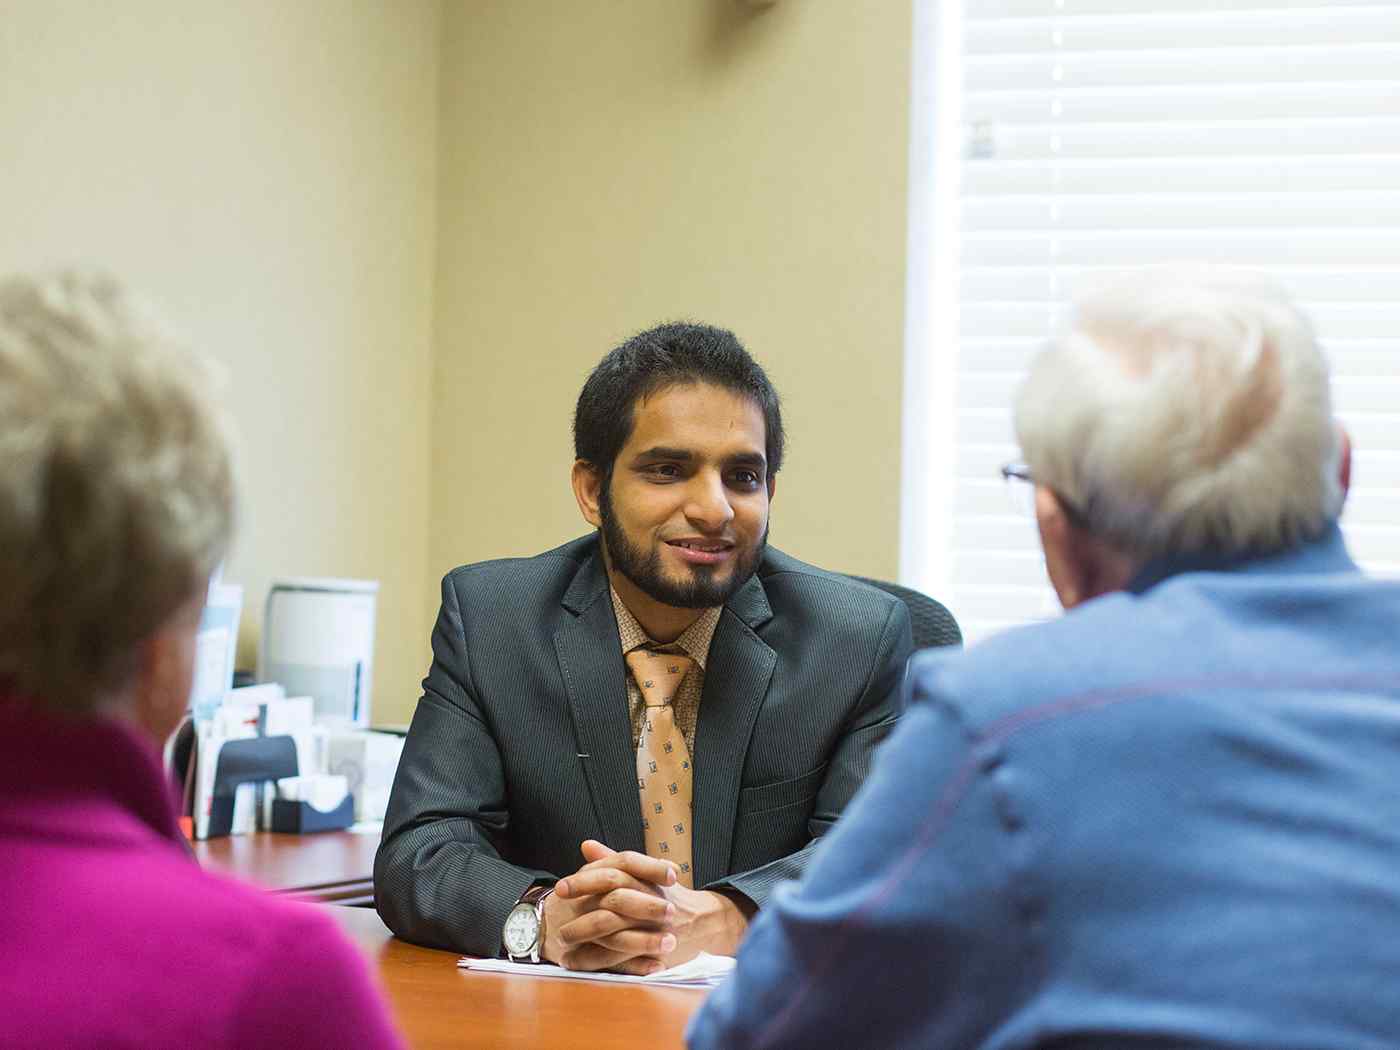 Student meets with clients